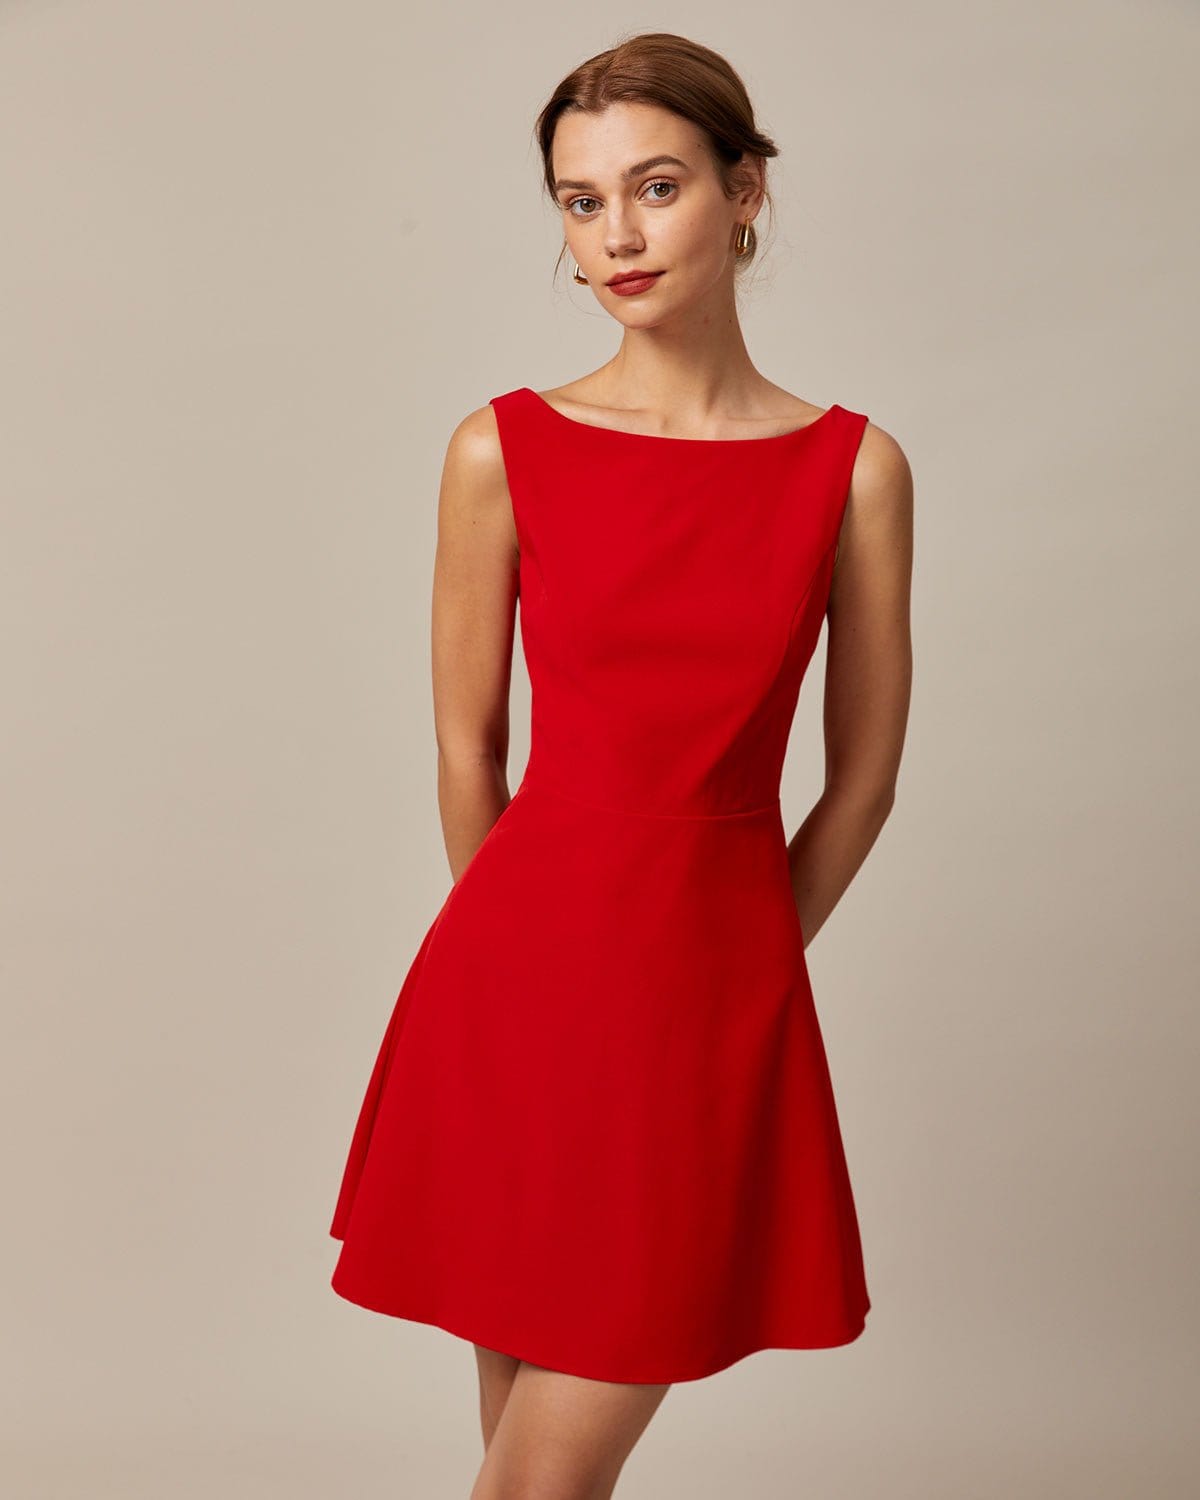 The Red Boat Neck High Waisted Mini Dress